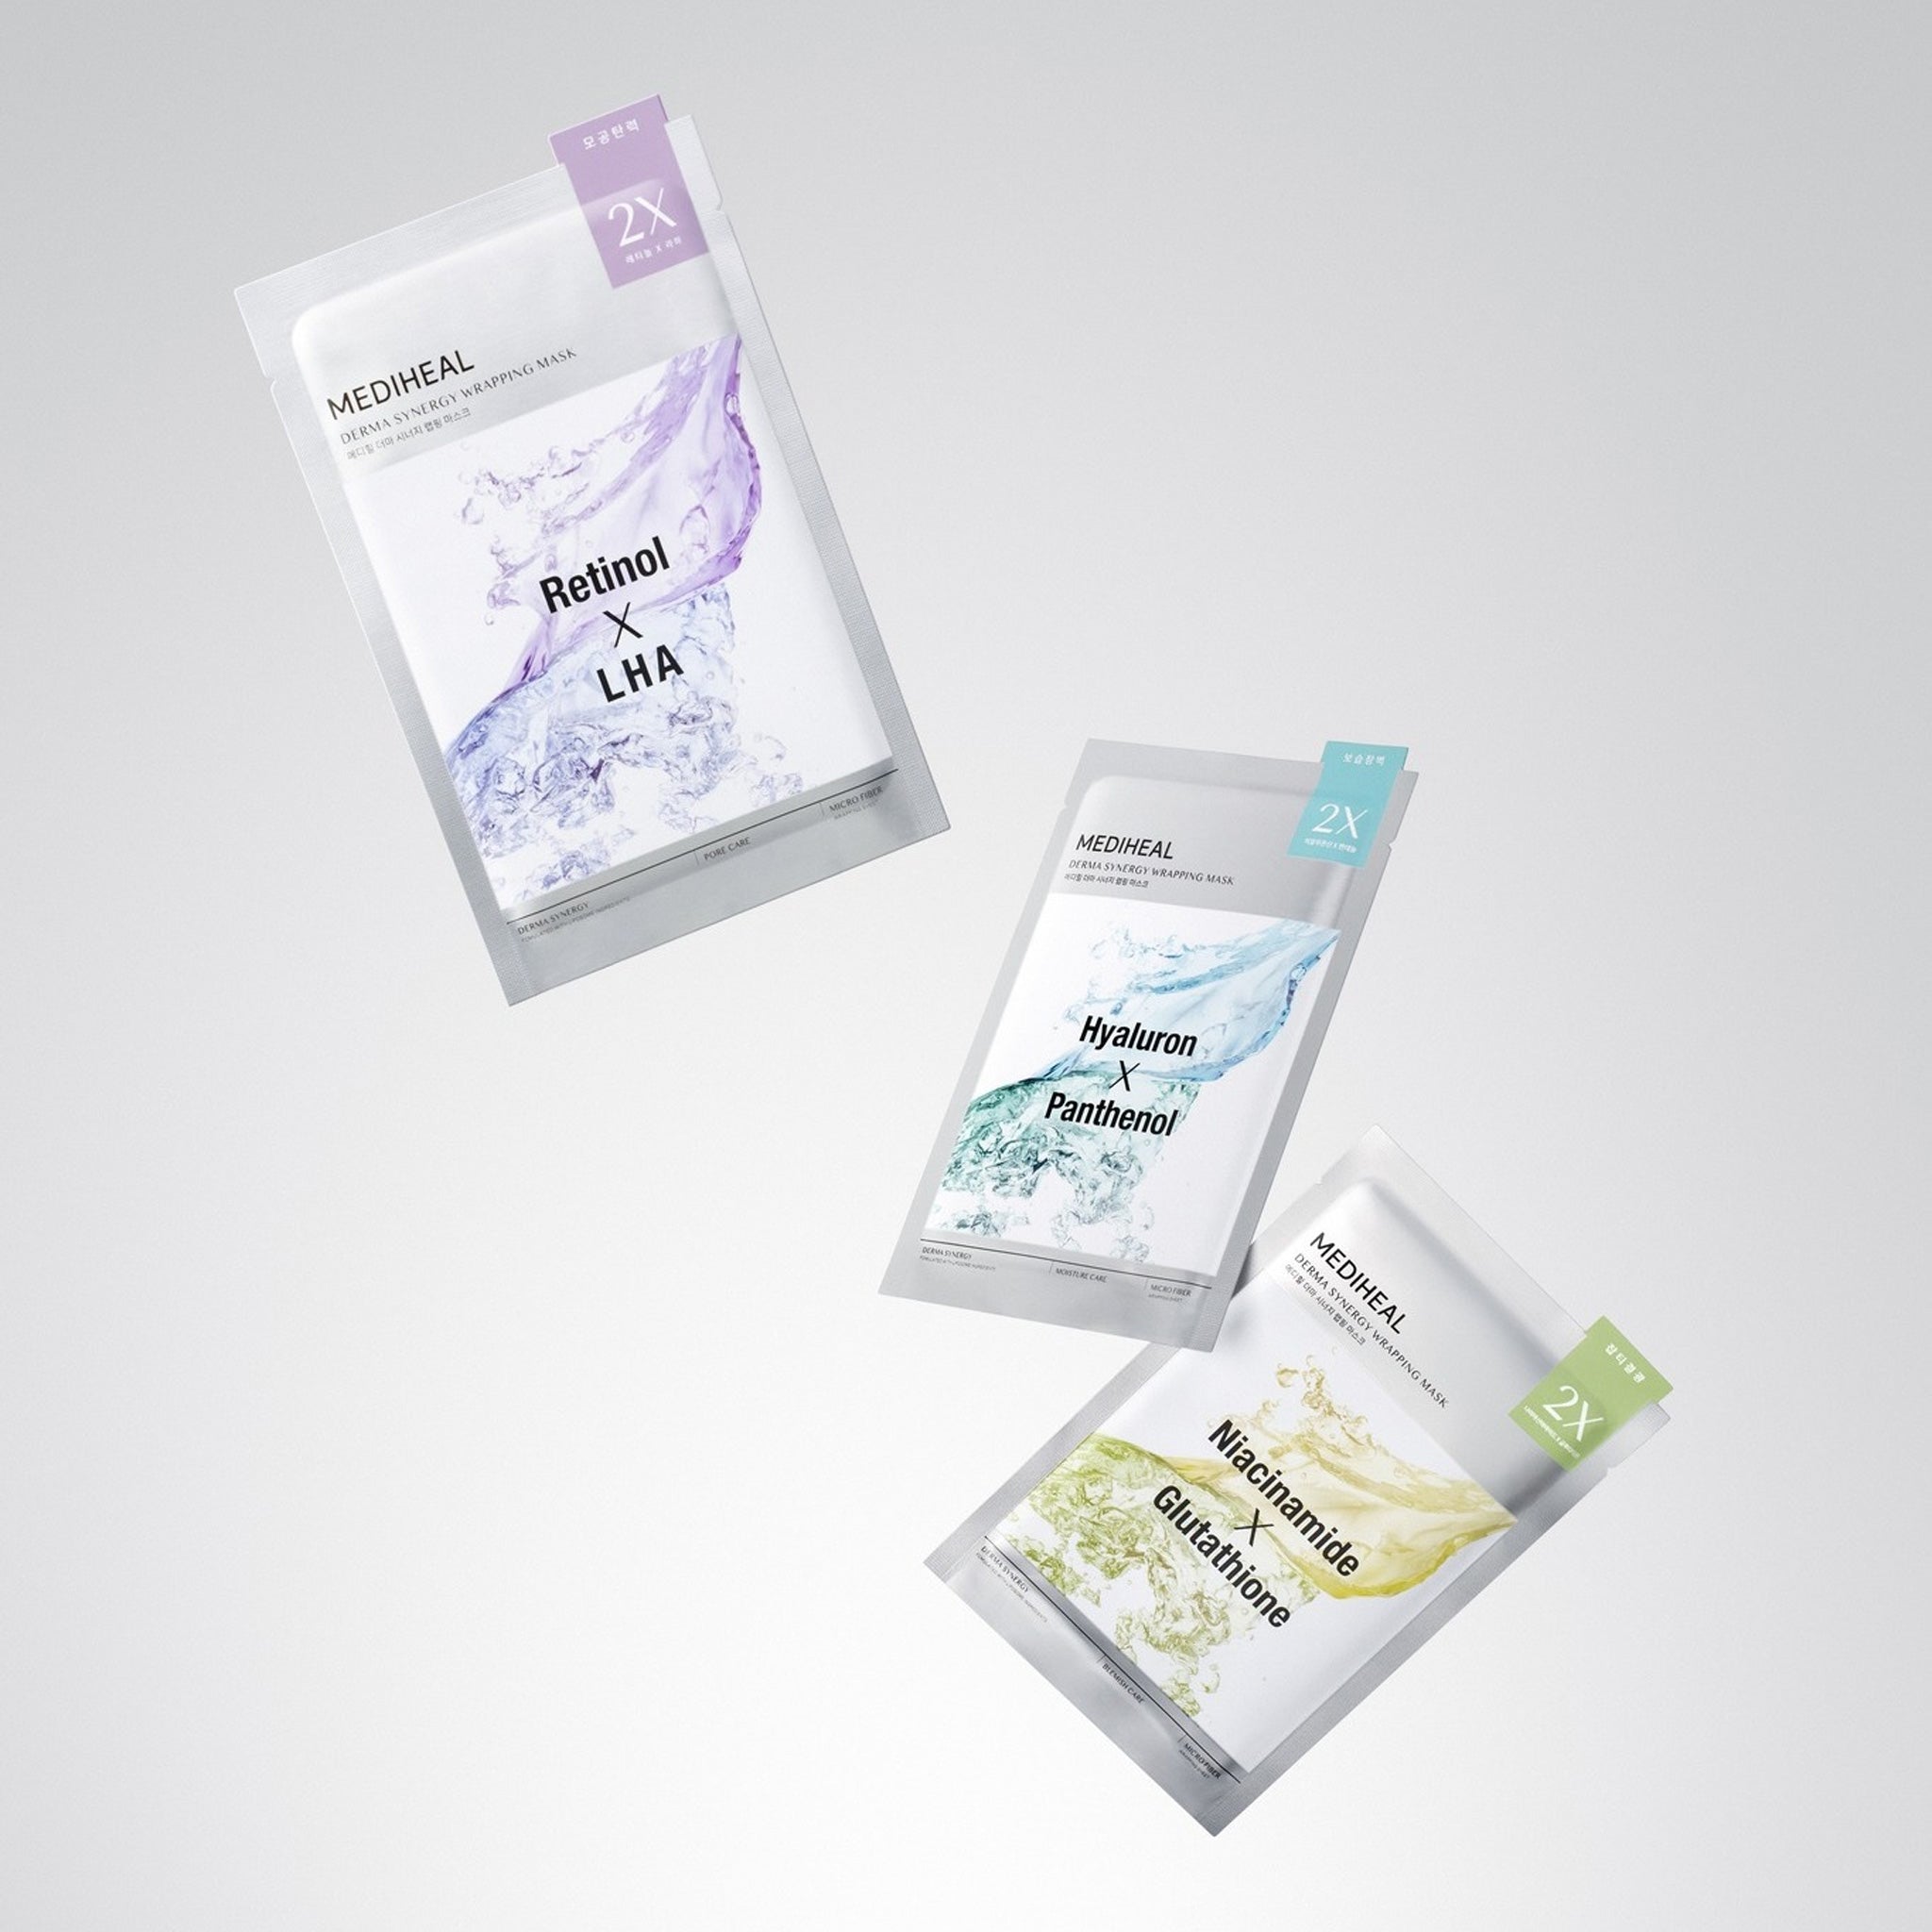 MEDIHEAL Derma Synergy Wrapping Mask